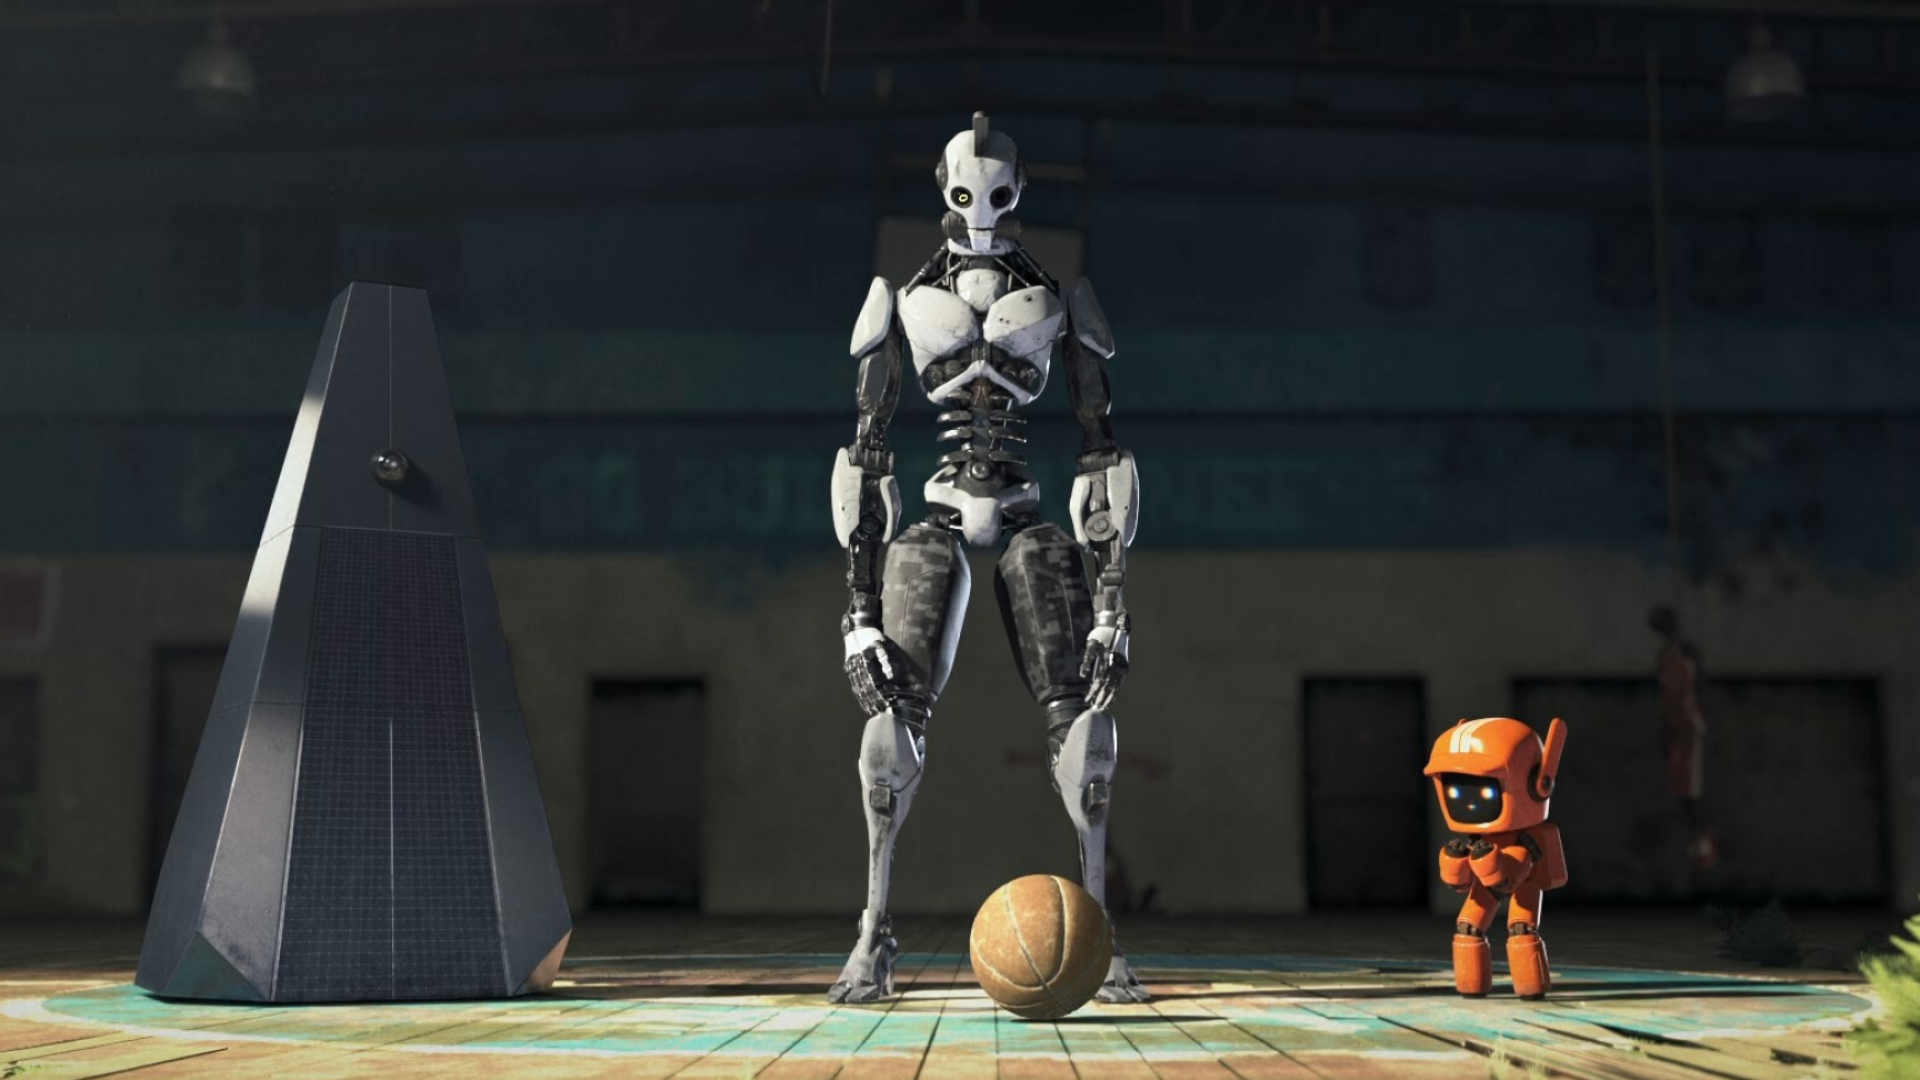 Love, Death and Robots: K-VRC, XBOT 4000 and 11-45-G, Three Robots, the second episode of the first volume. 1920x1080 Full HD Wallpaper.